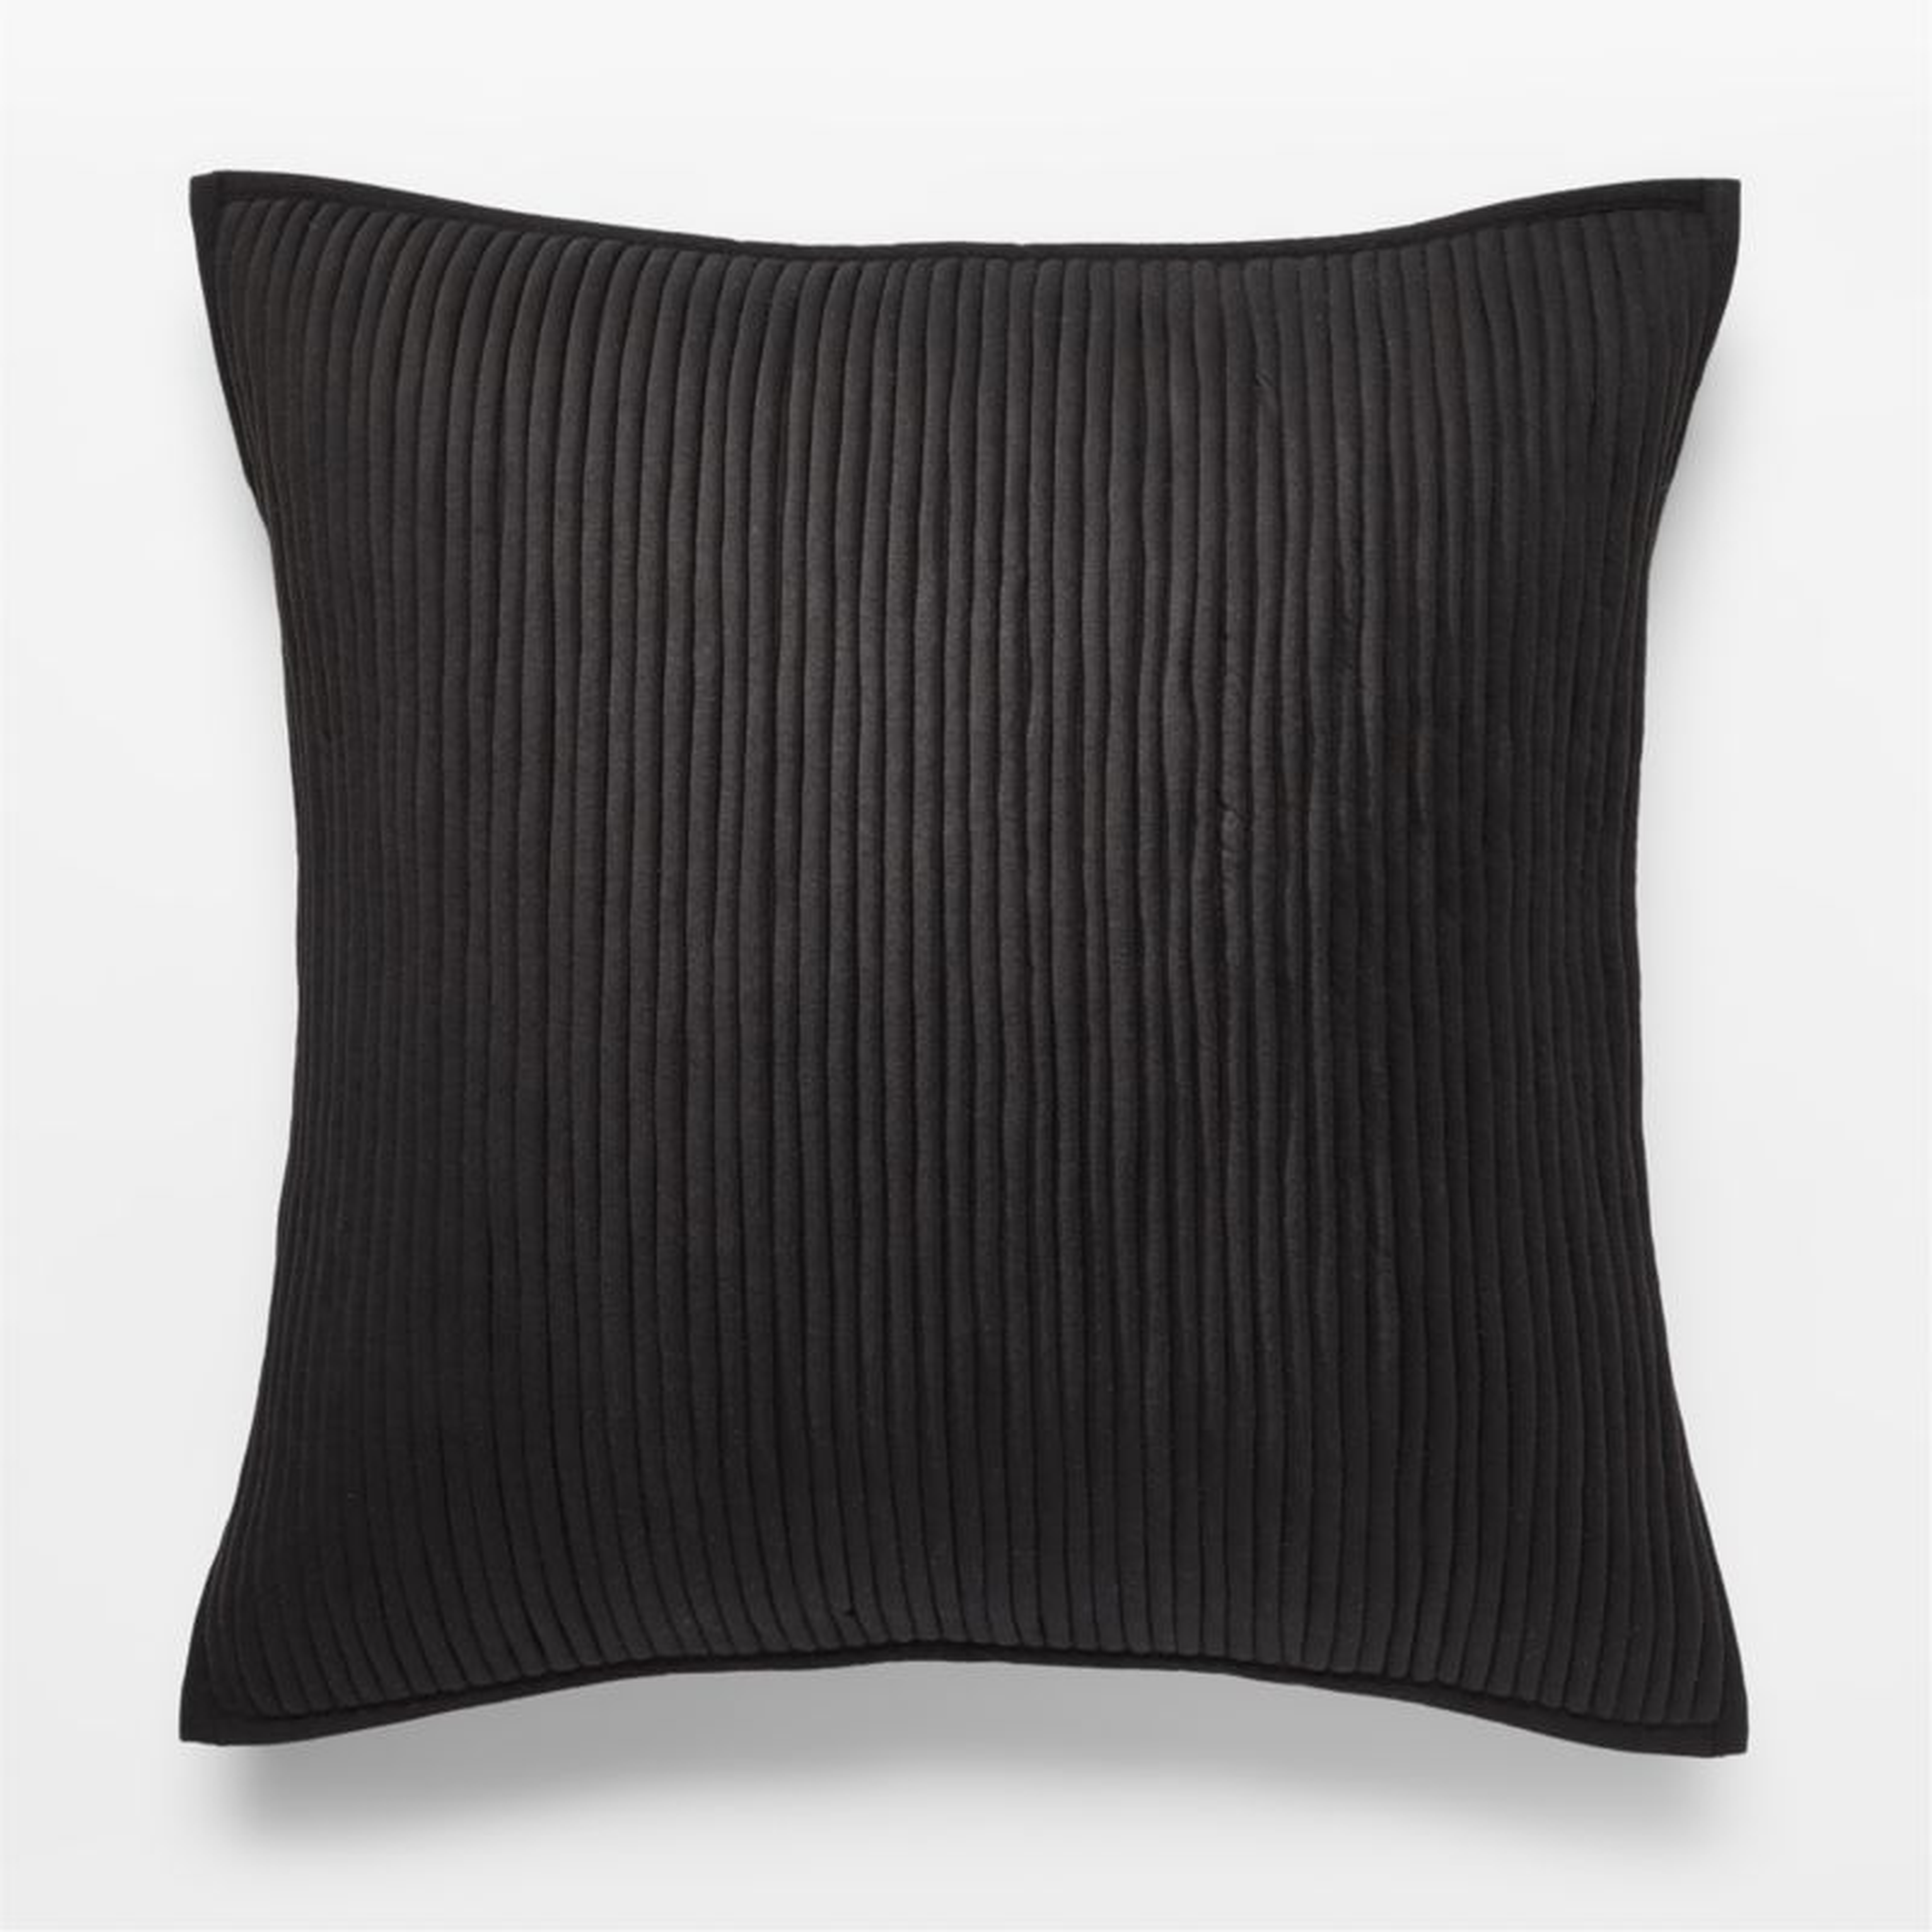 Sequence Black Throw Pillow with Feather-Down Insert 20" - CB2